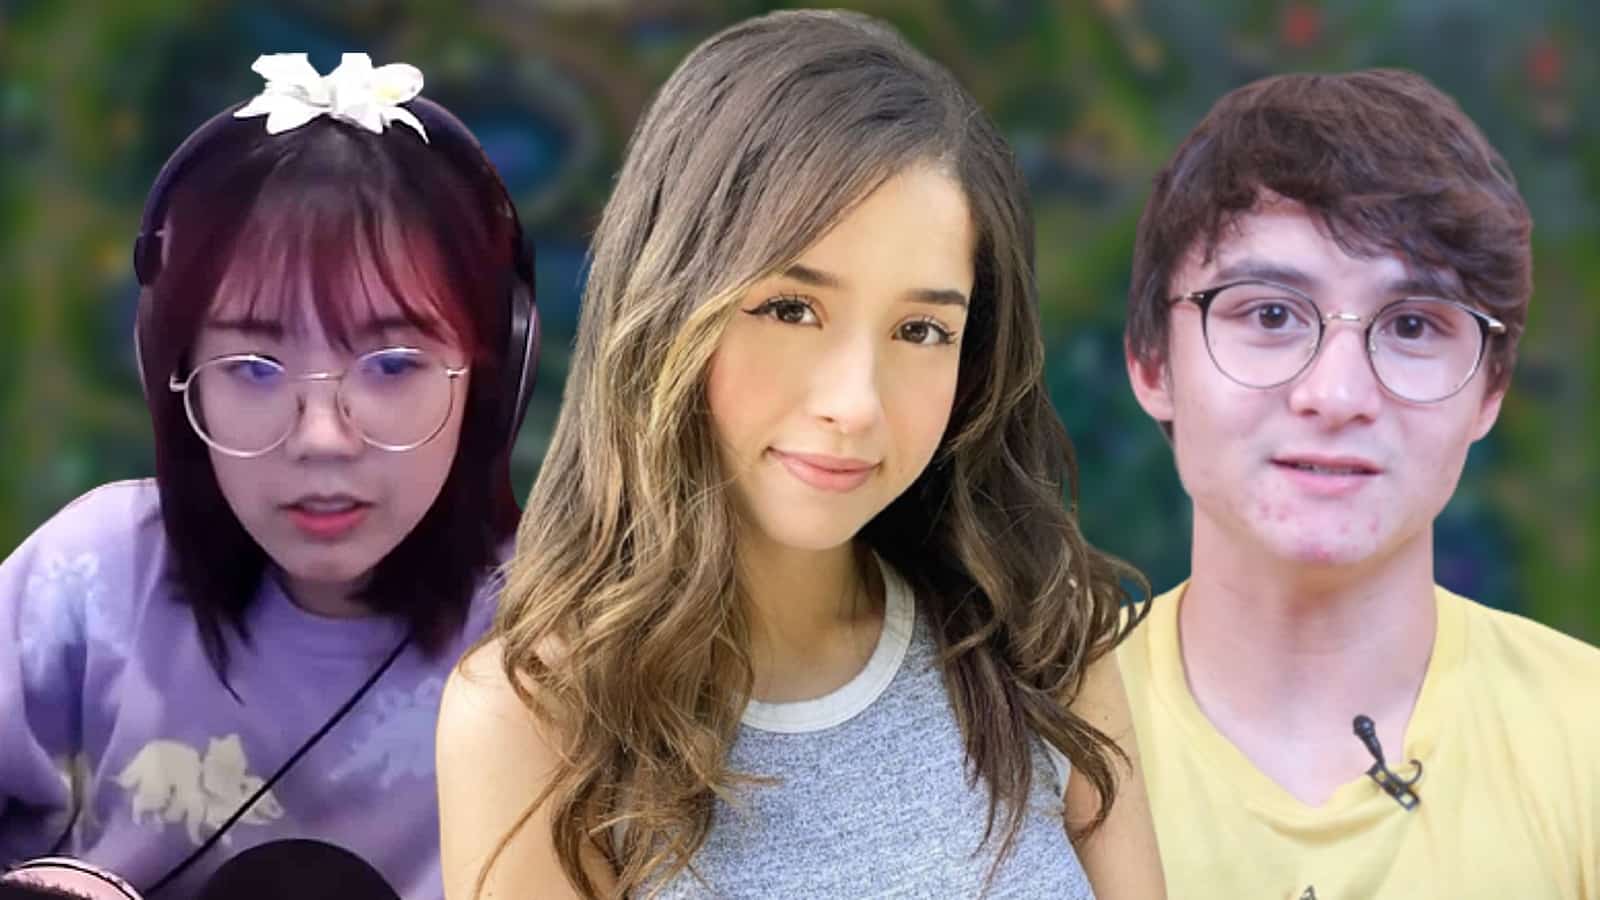 Pokimane with LilyPichu and Michael Reeves on top of blurred image of League of Legends' Summoners Rift